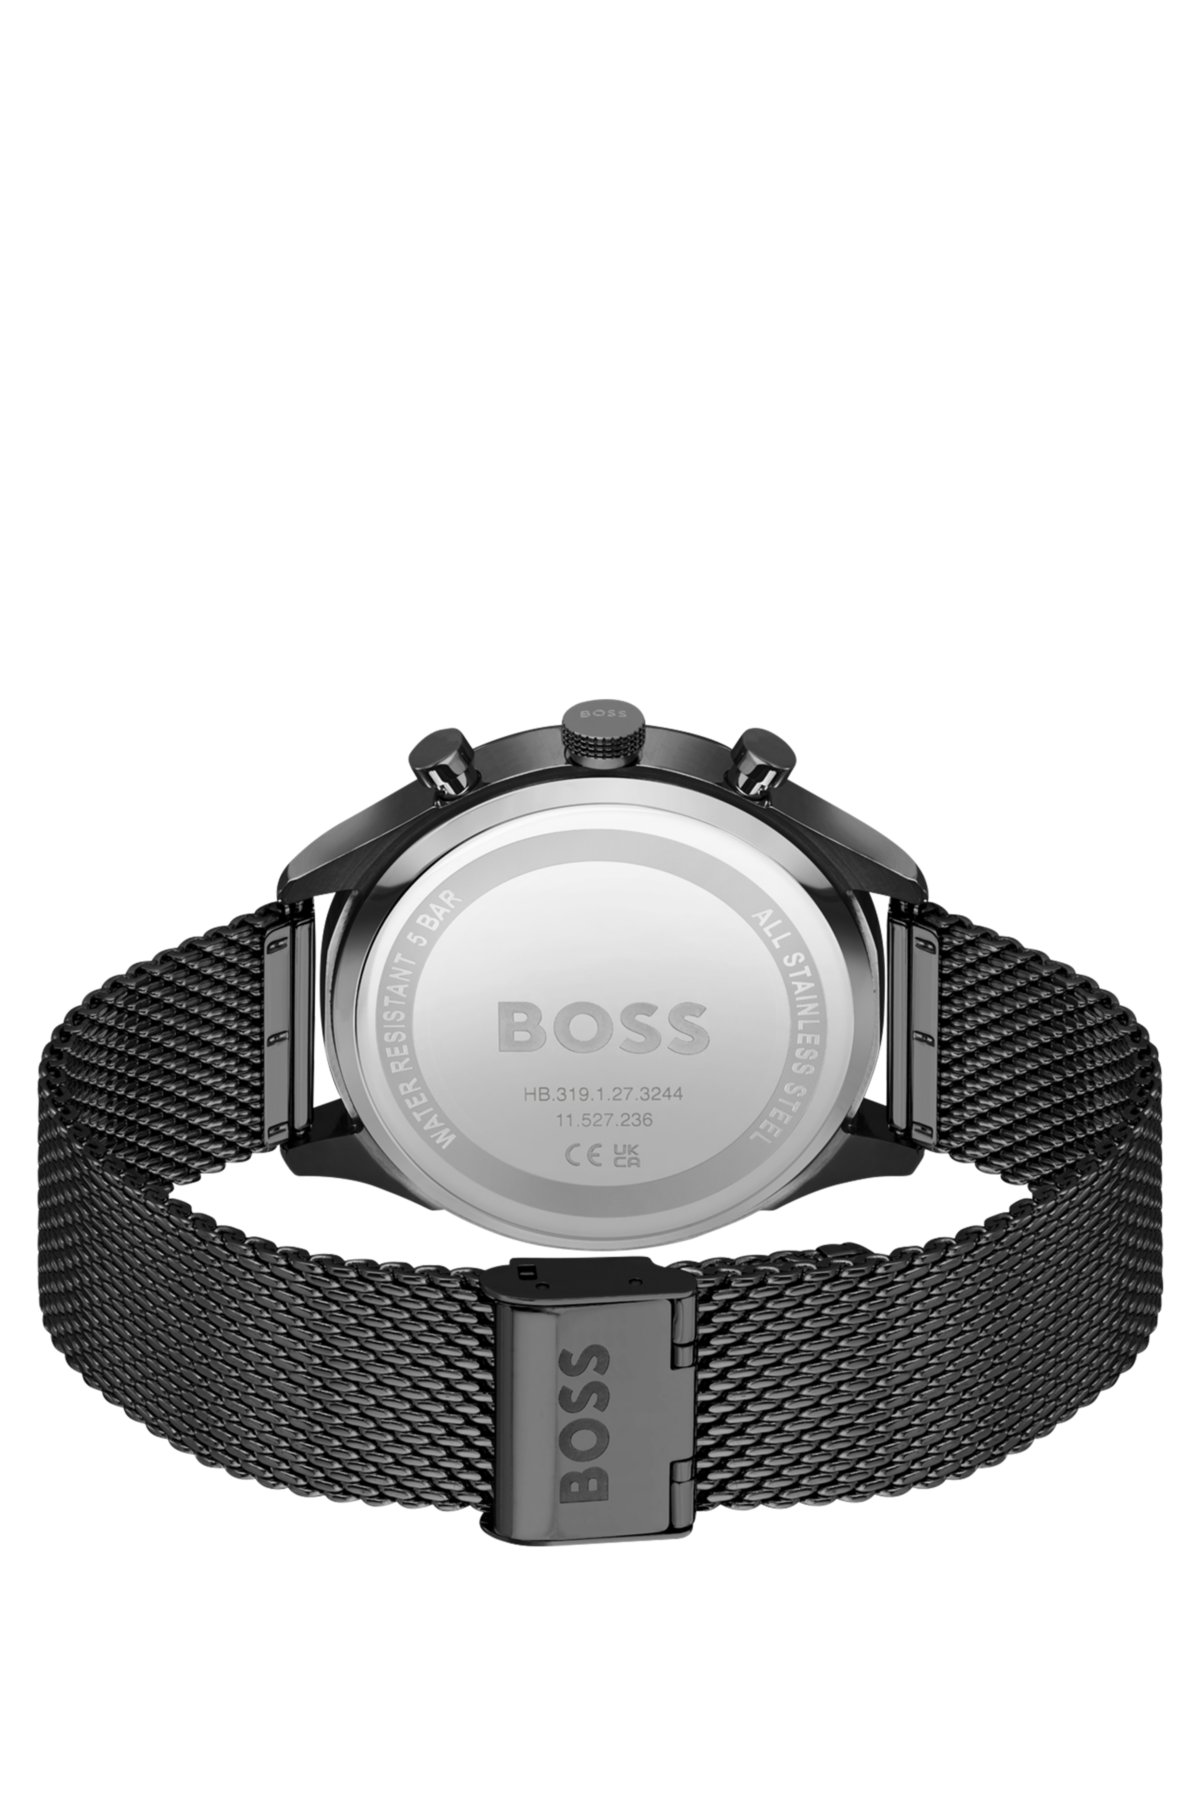 BOSS - bracelet watch chronograph with Black-plated mesh